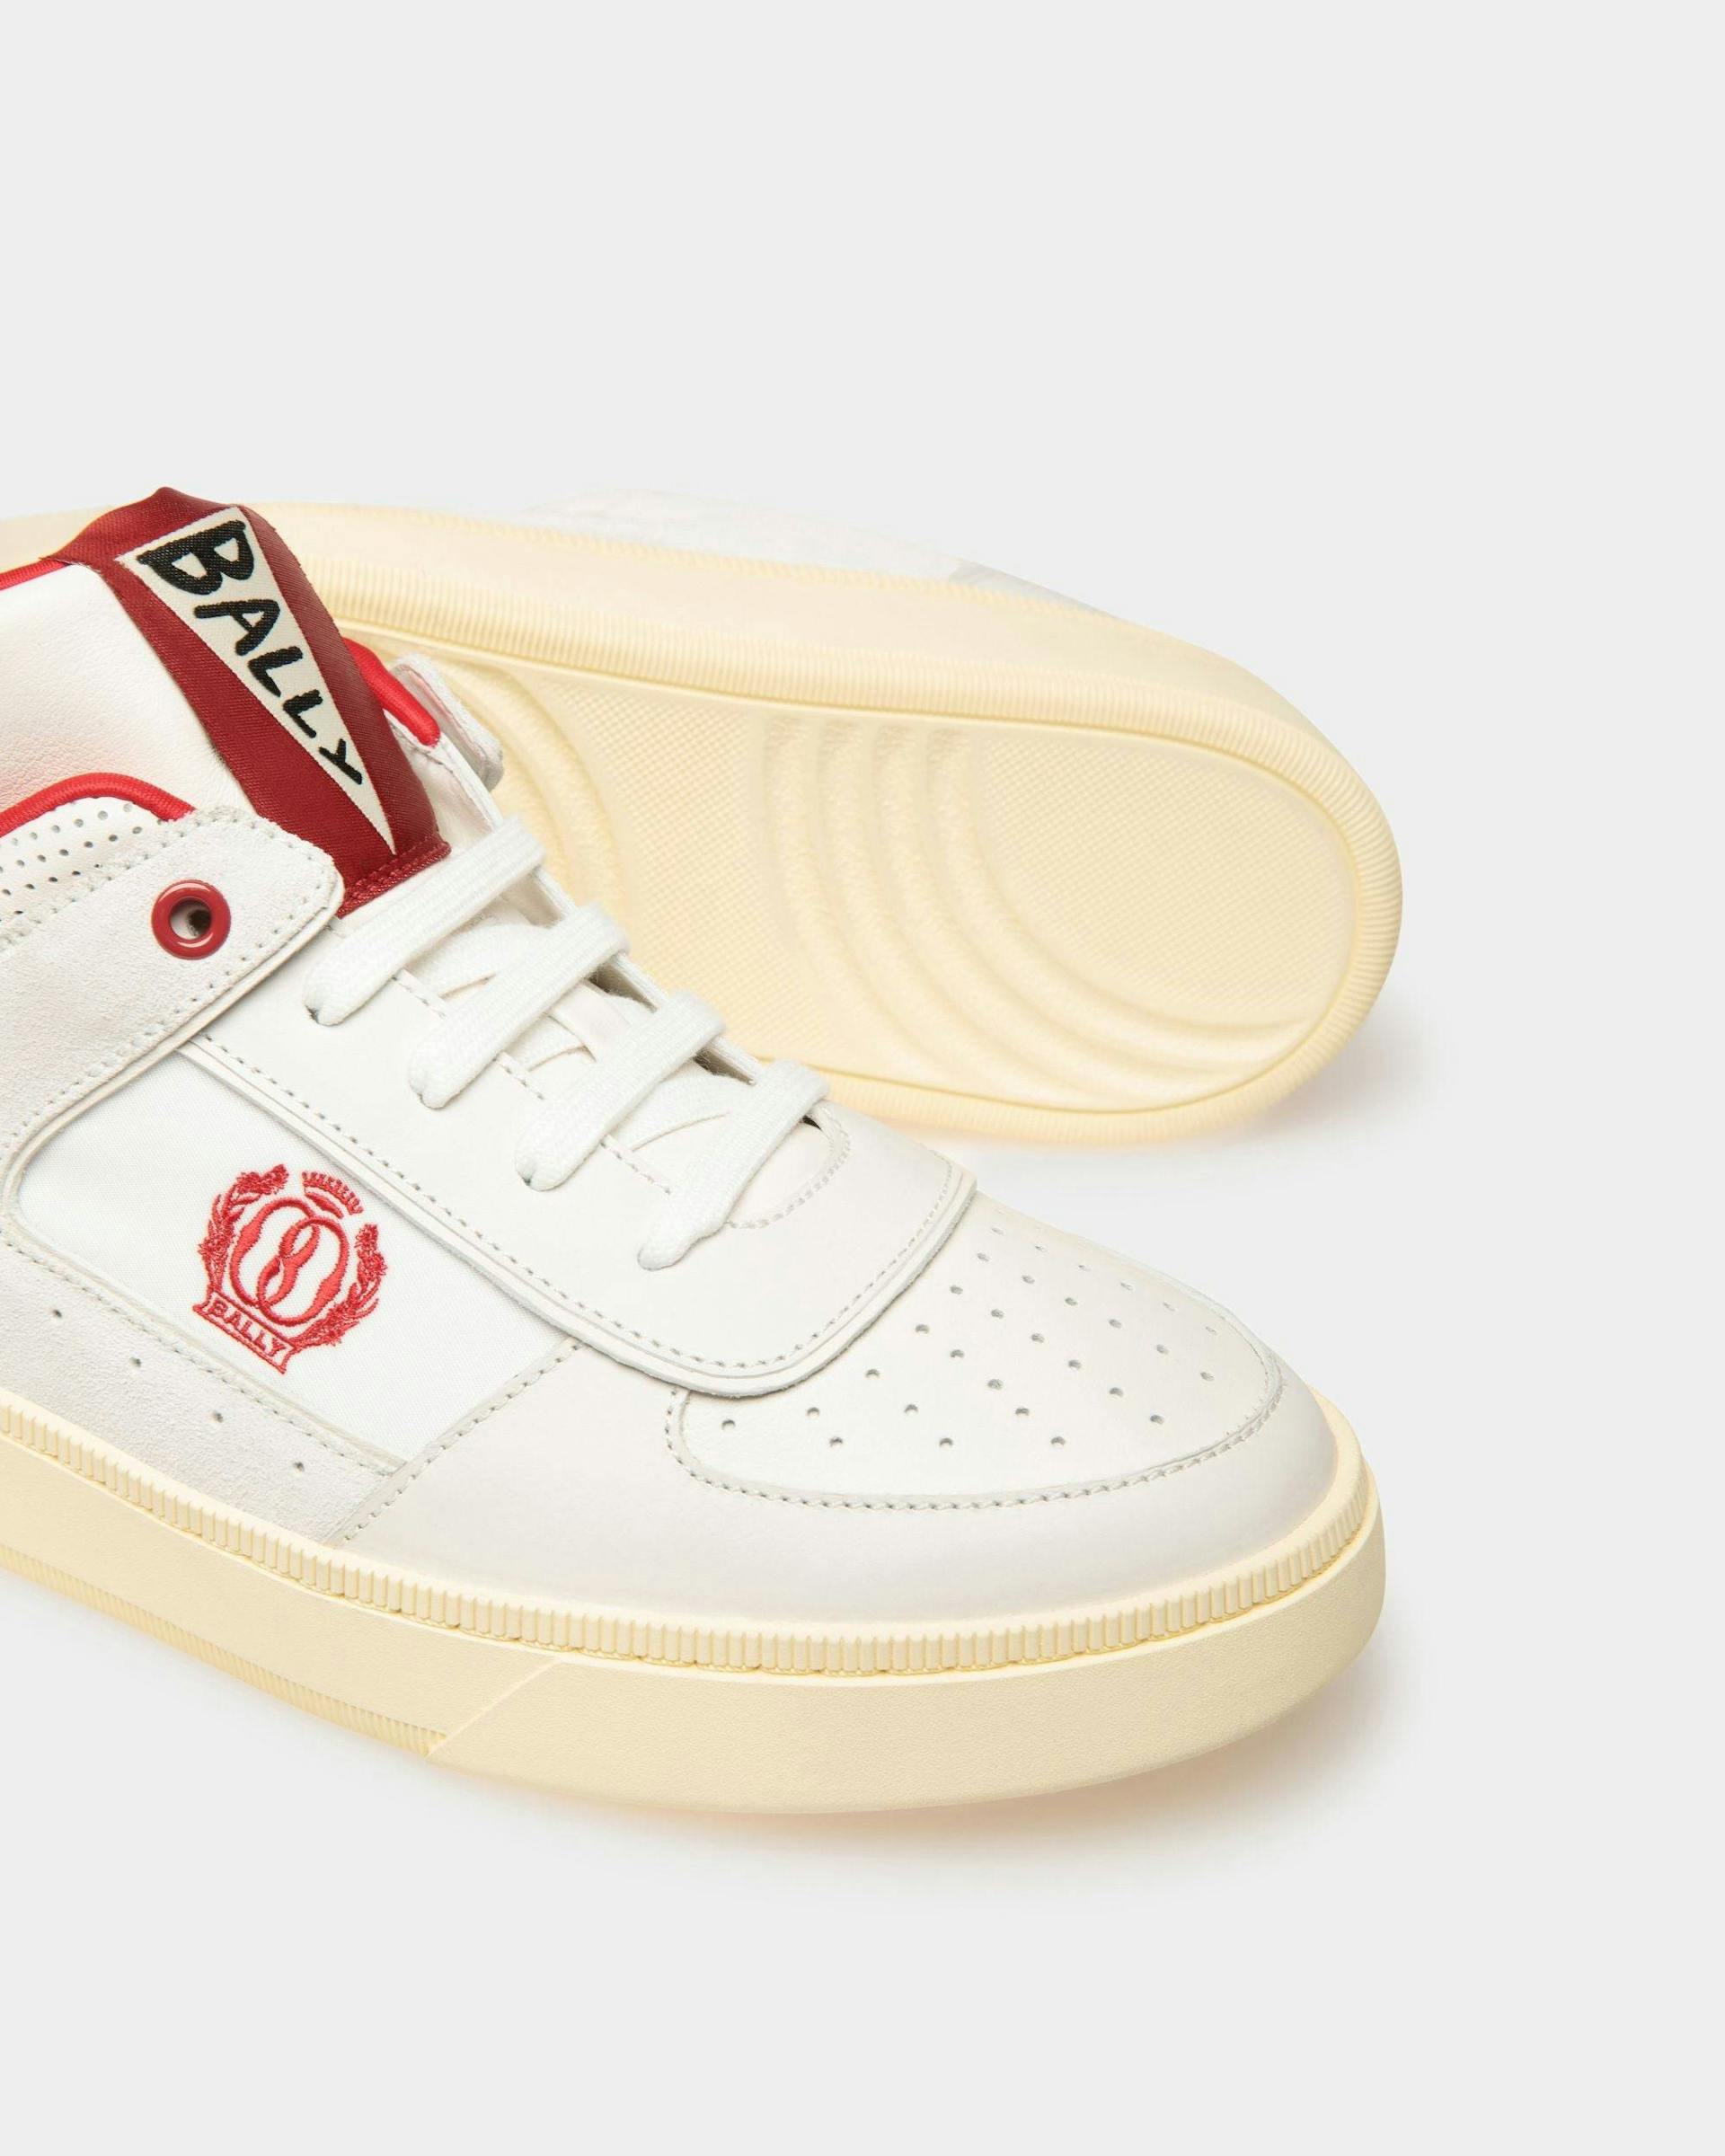 Women's Raise Sneakers In White And Red Leather | Bally | Still Life Below